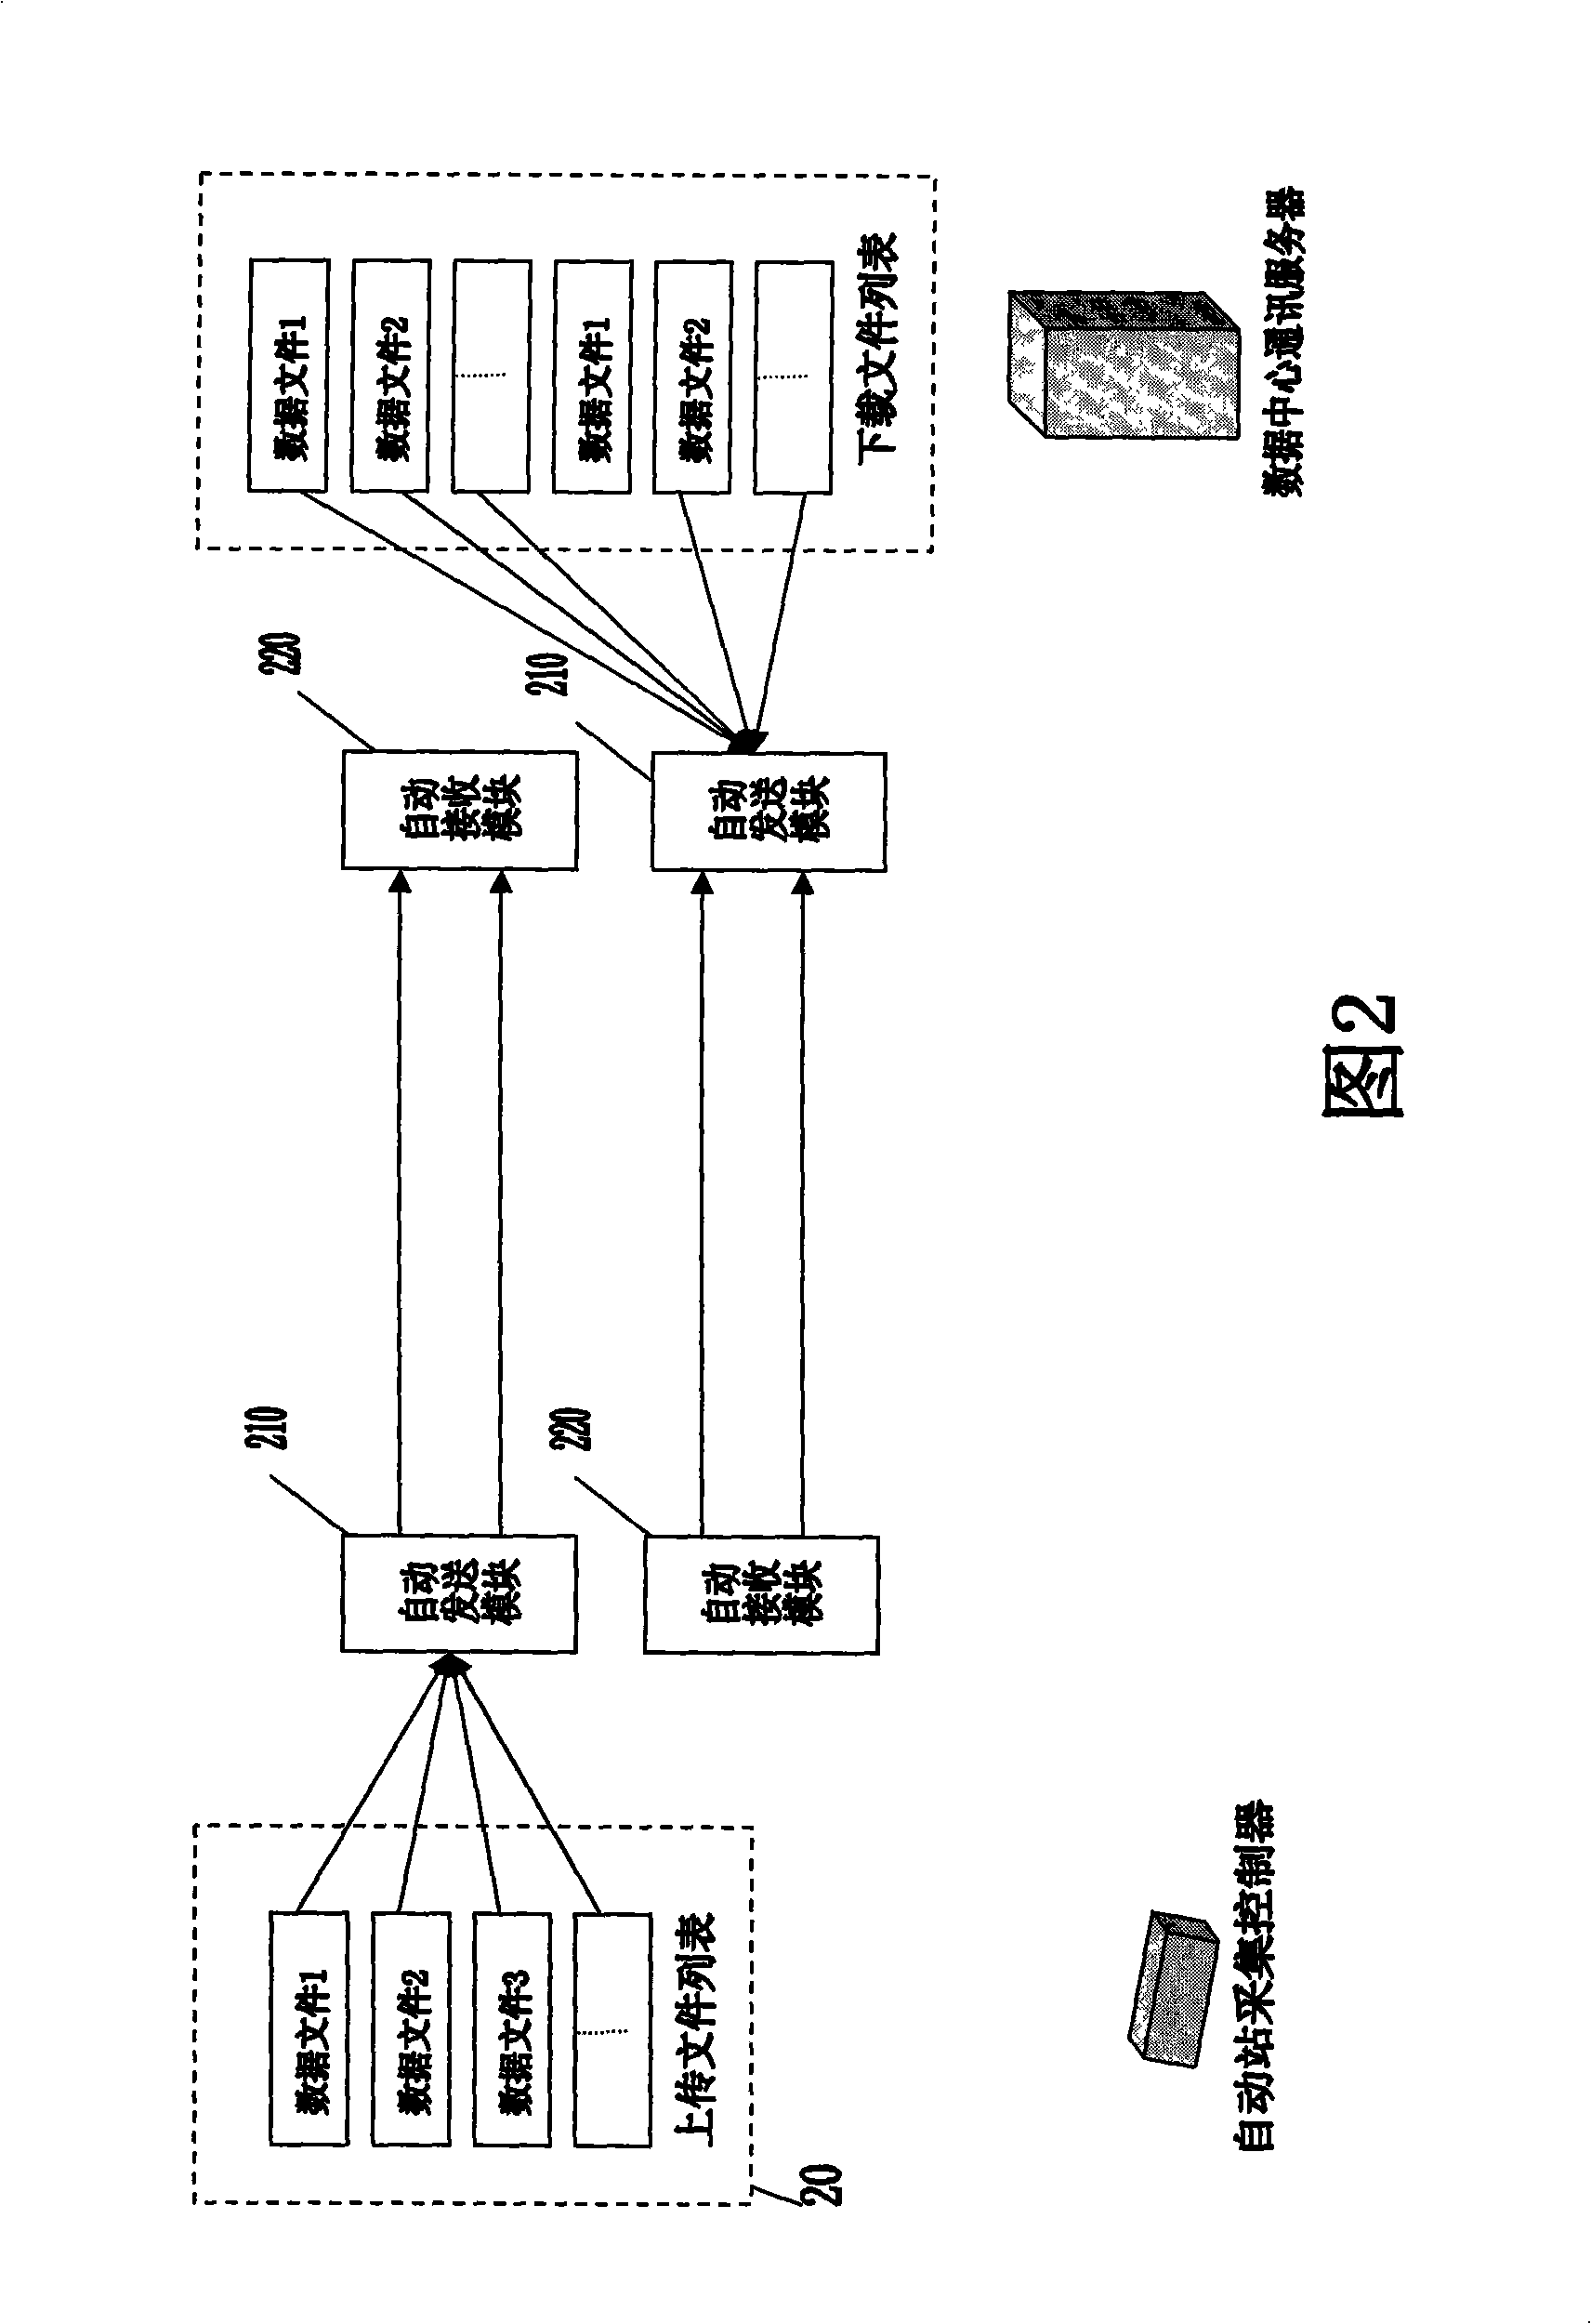 Communication system for automatic monitoring network environment